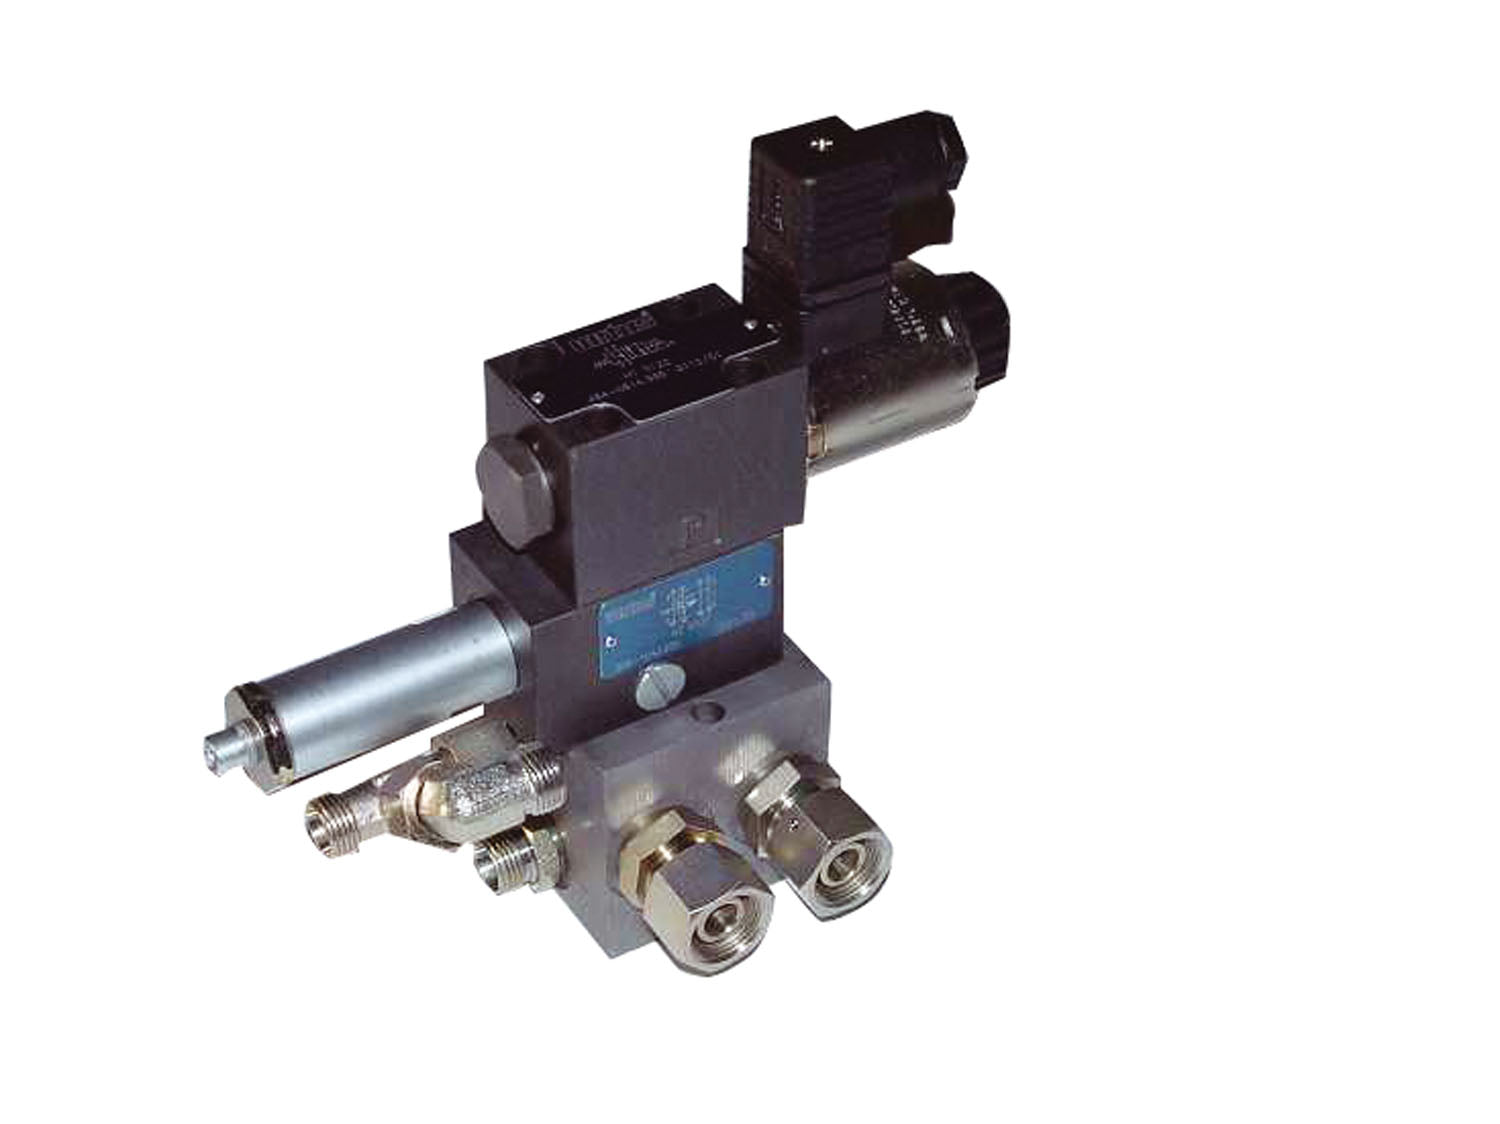 Vetus HT1024 - Solenoid control unit for use with stabilizers